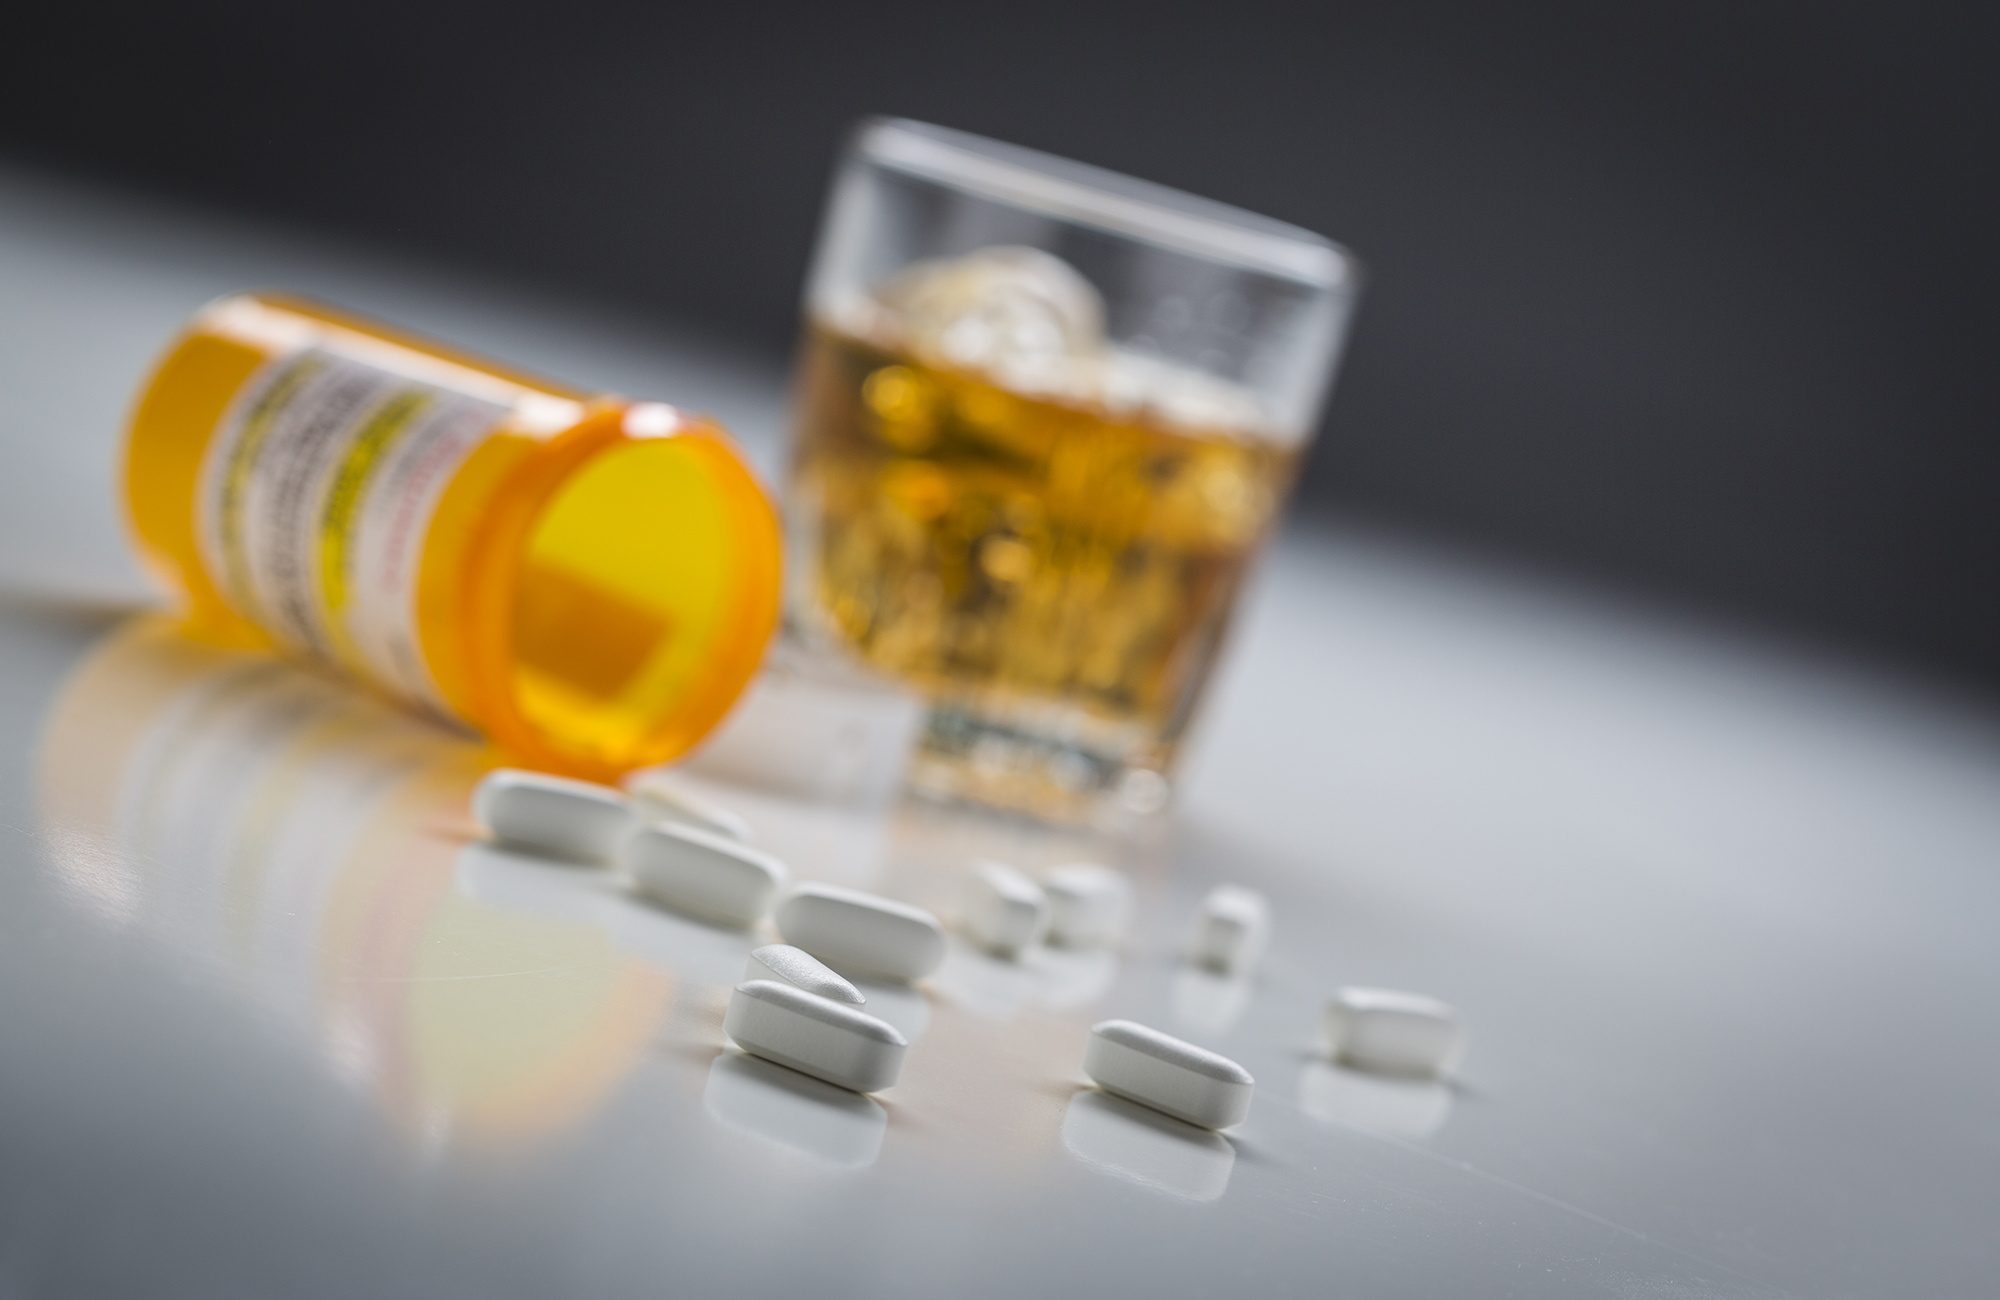 The struggle for sobriety: overcoming drug addiction